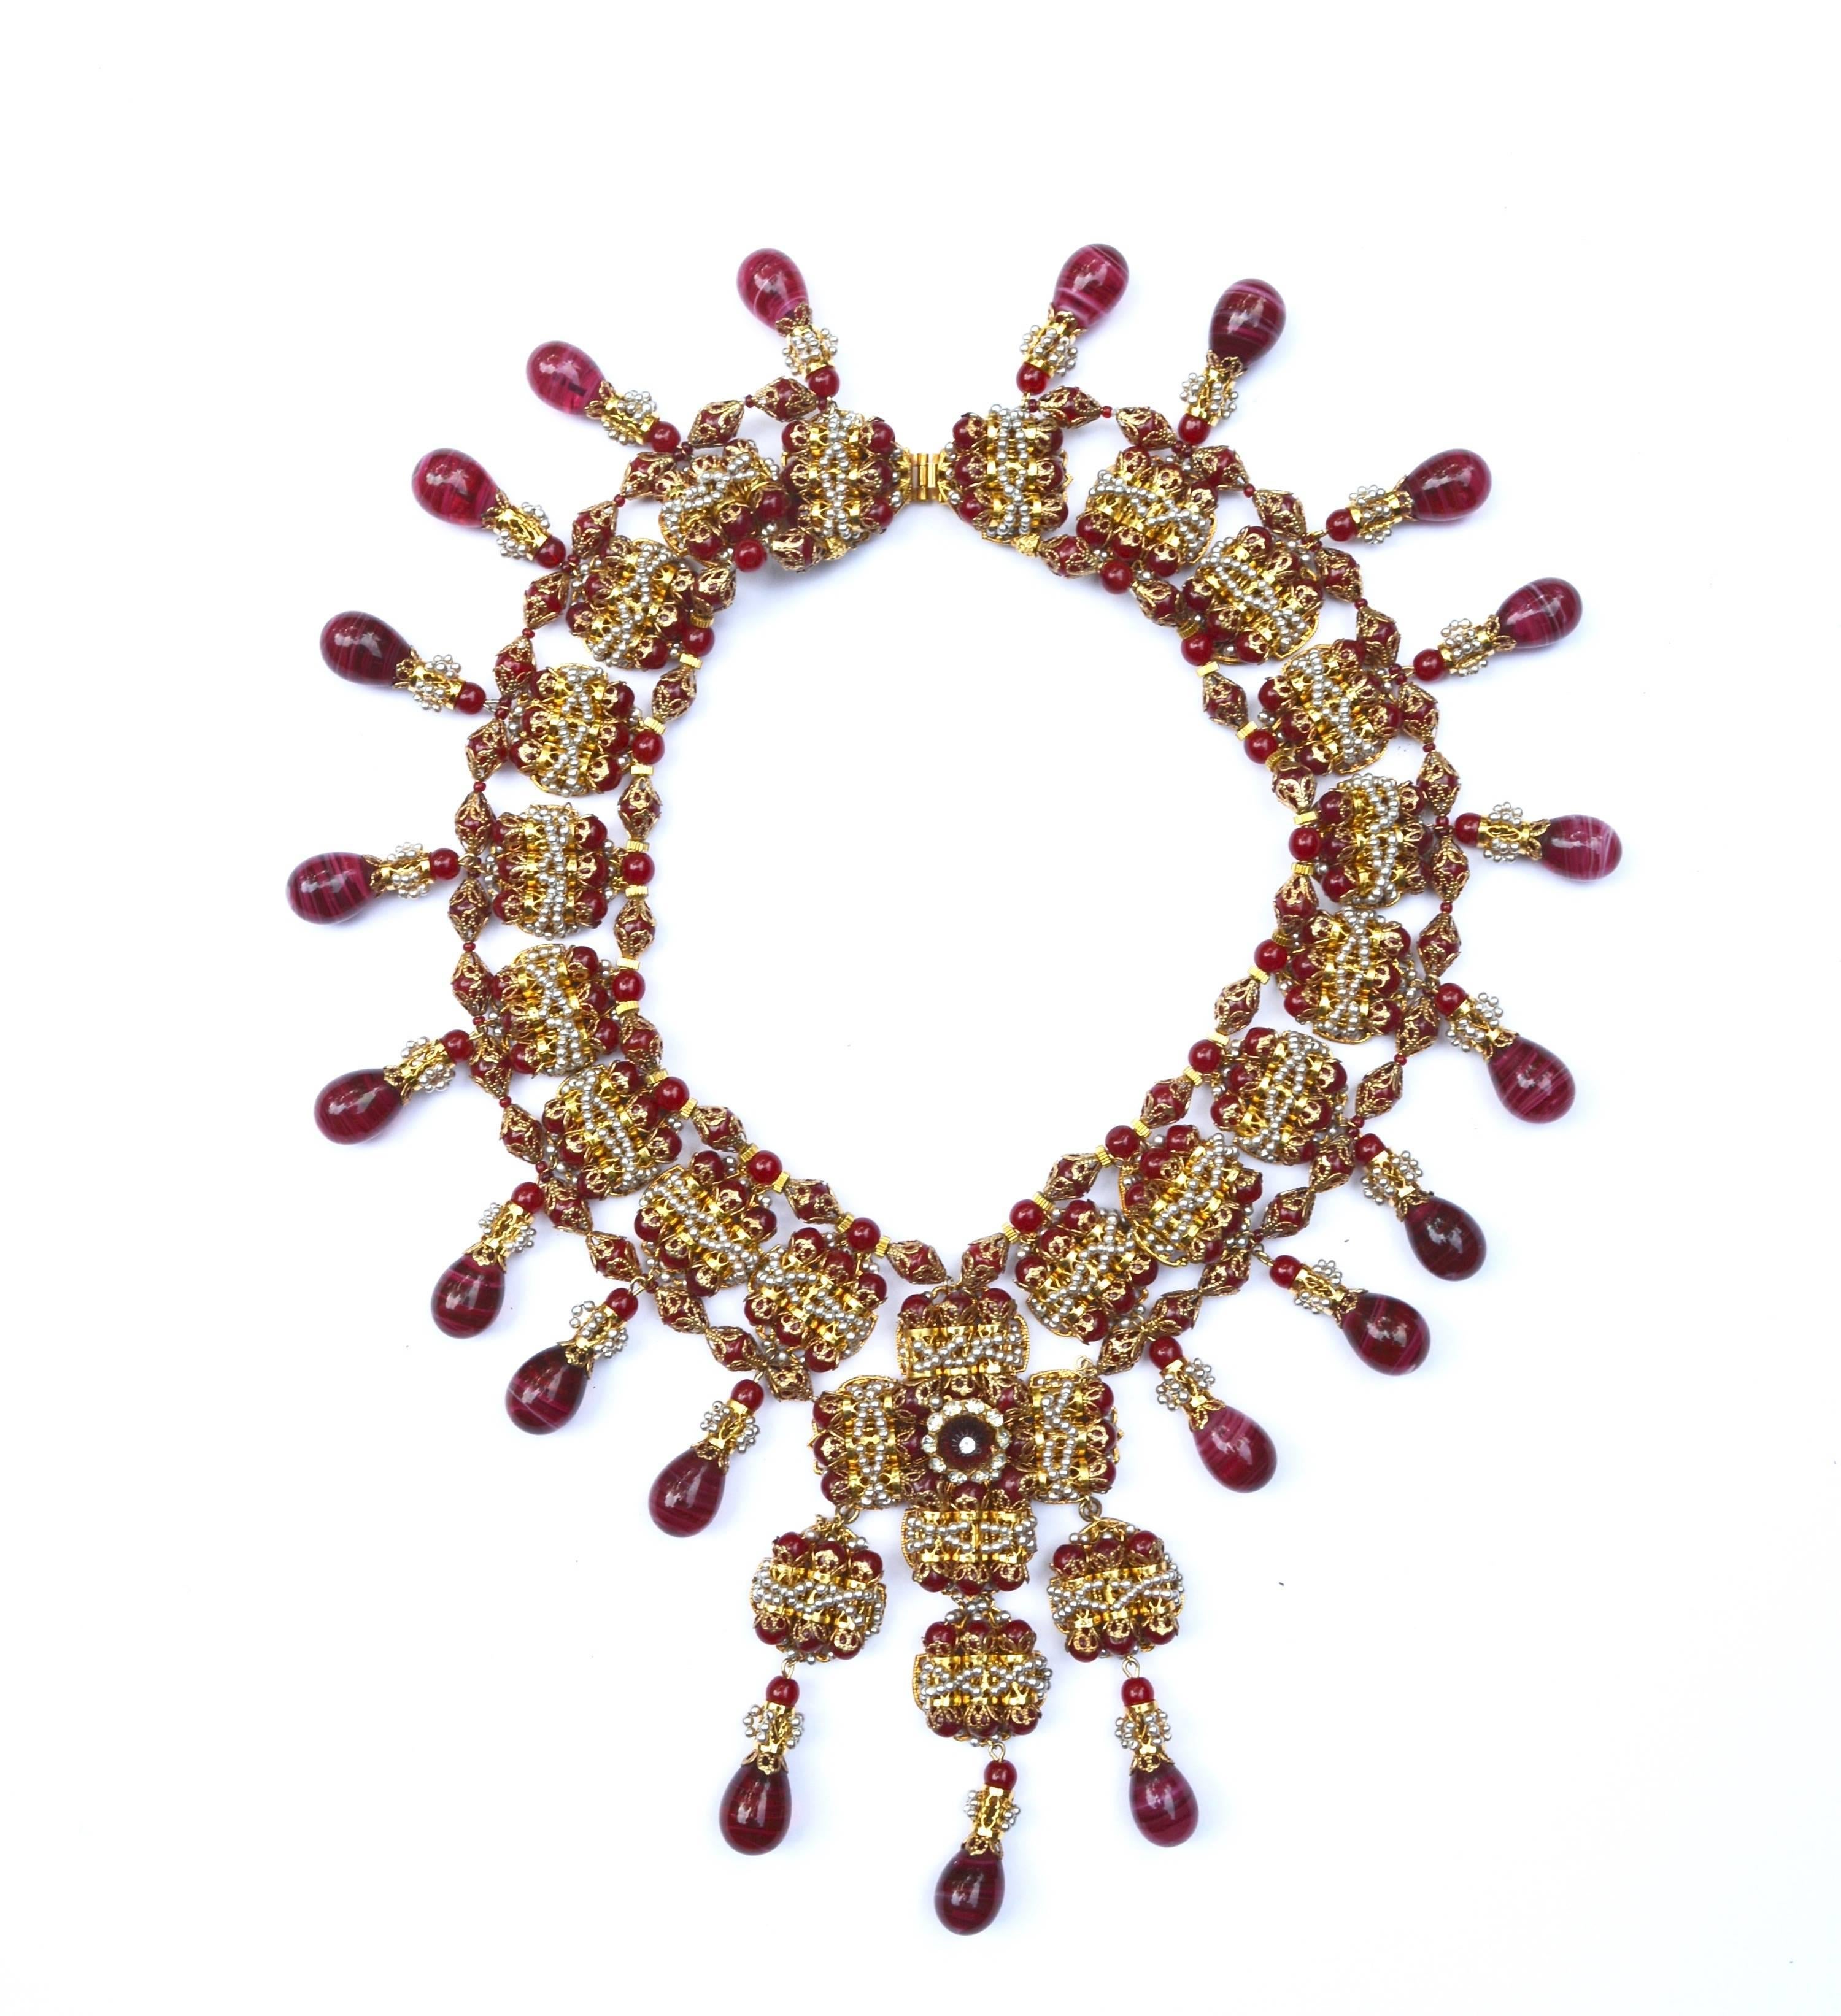 One of a kind, couture level American made William de Lillo signed elaborately beaded glass drop necklace. Made by Robert Clarke while designing for De Lillo. This piece really is the best of American "couture" style jewelry. The piece is